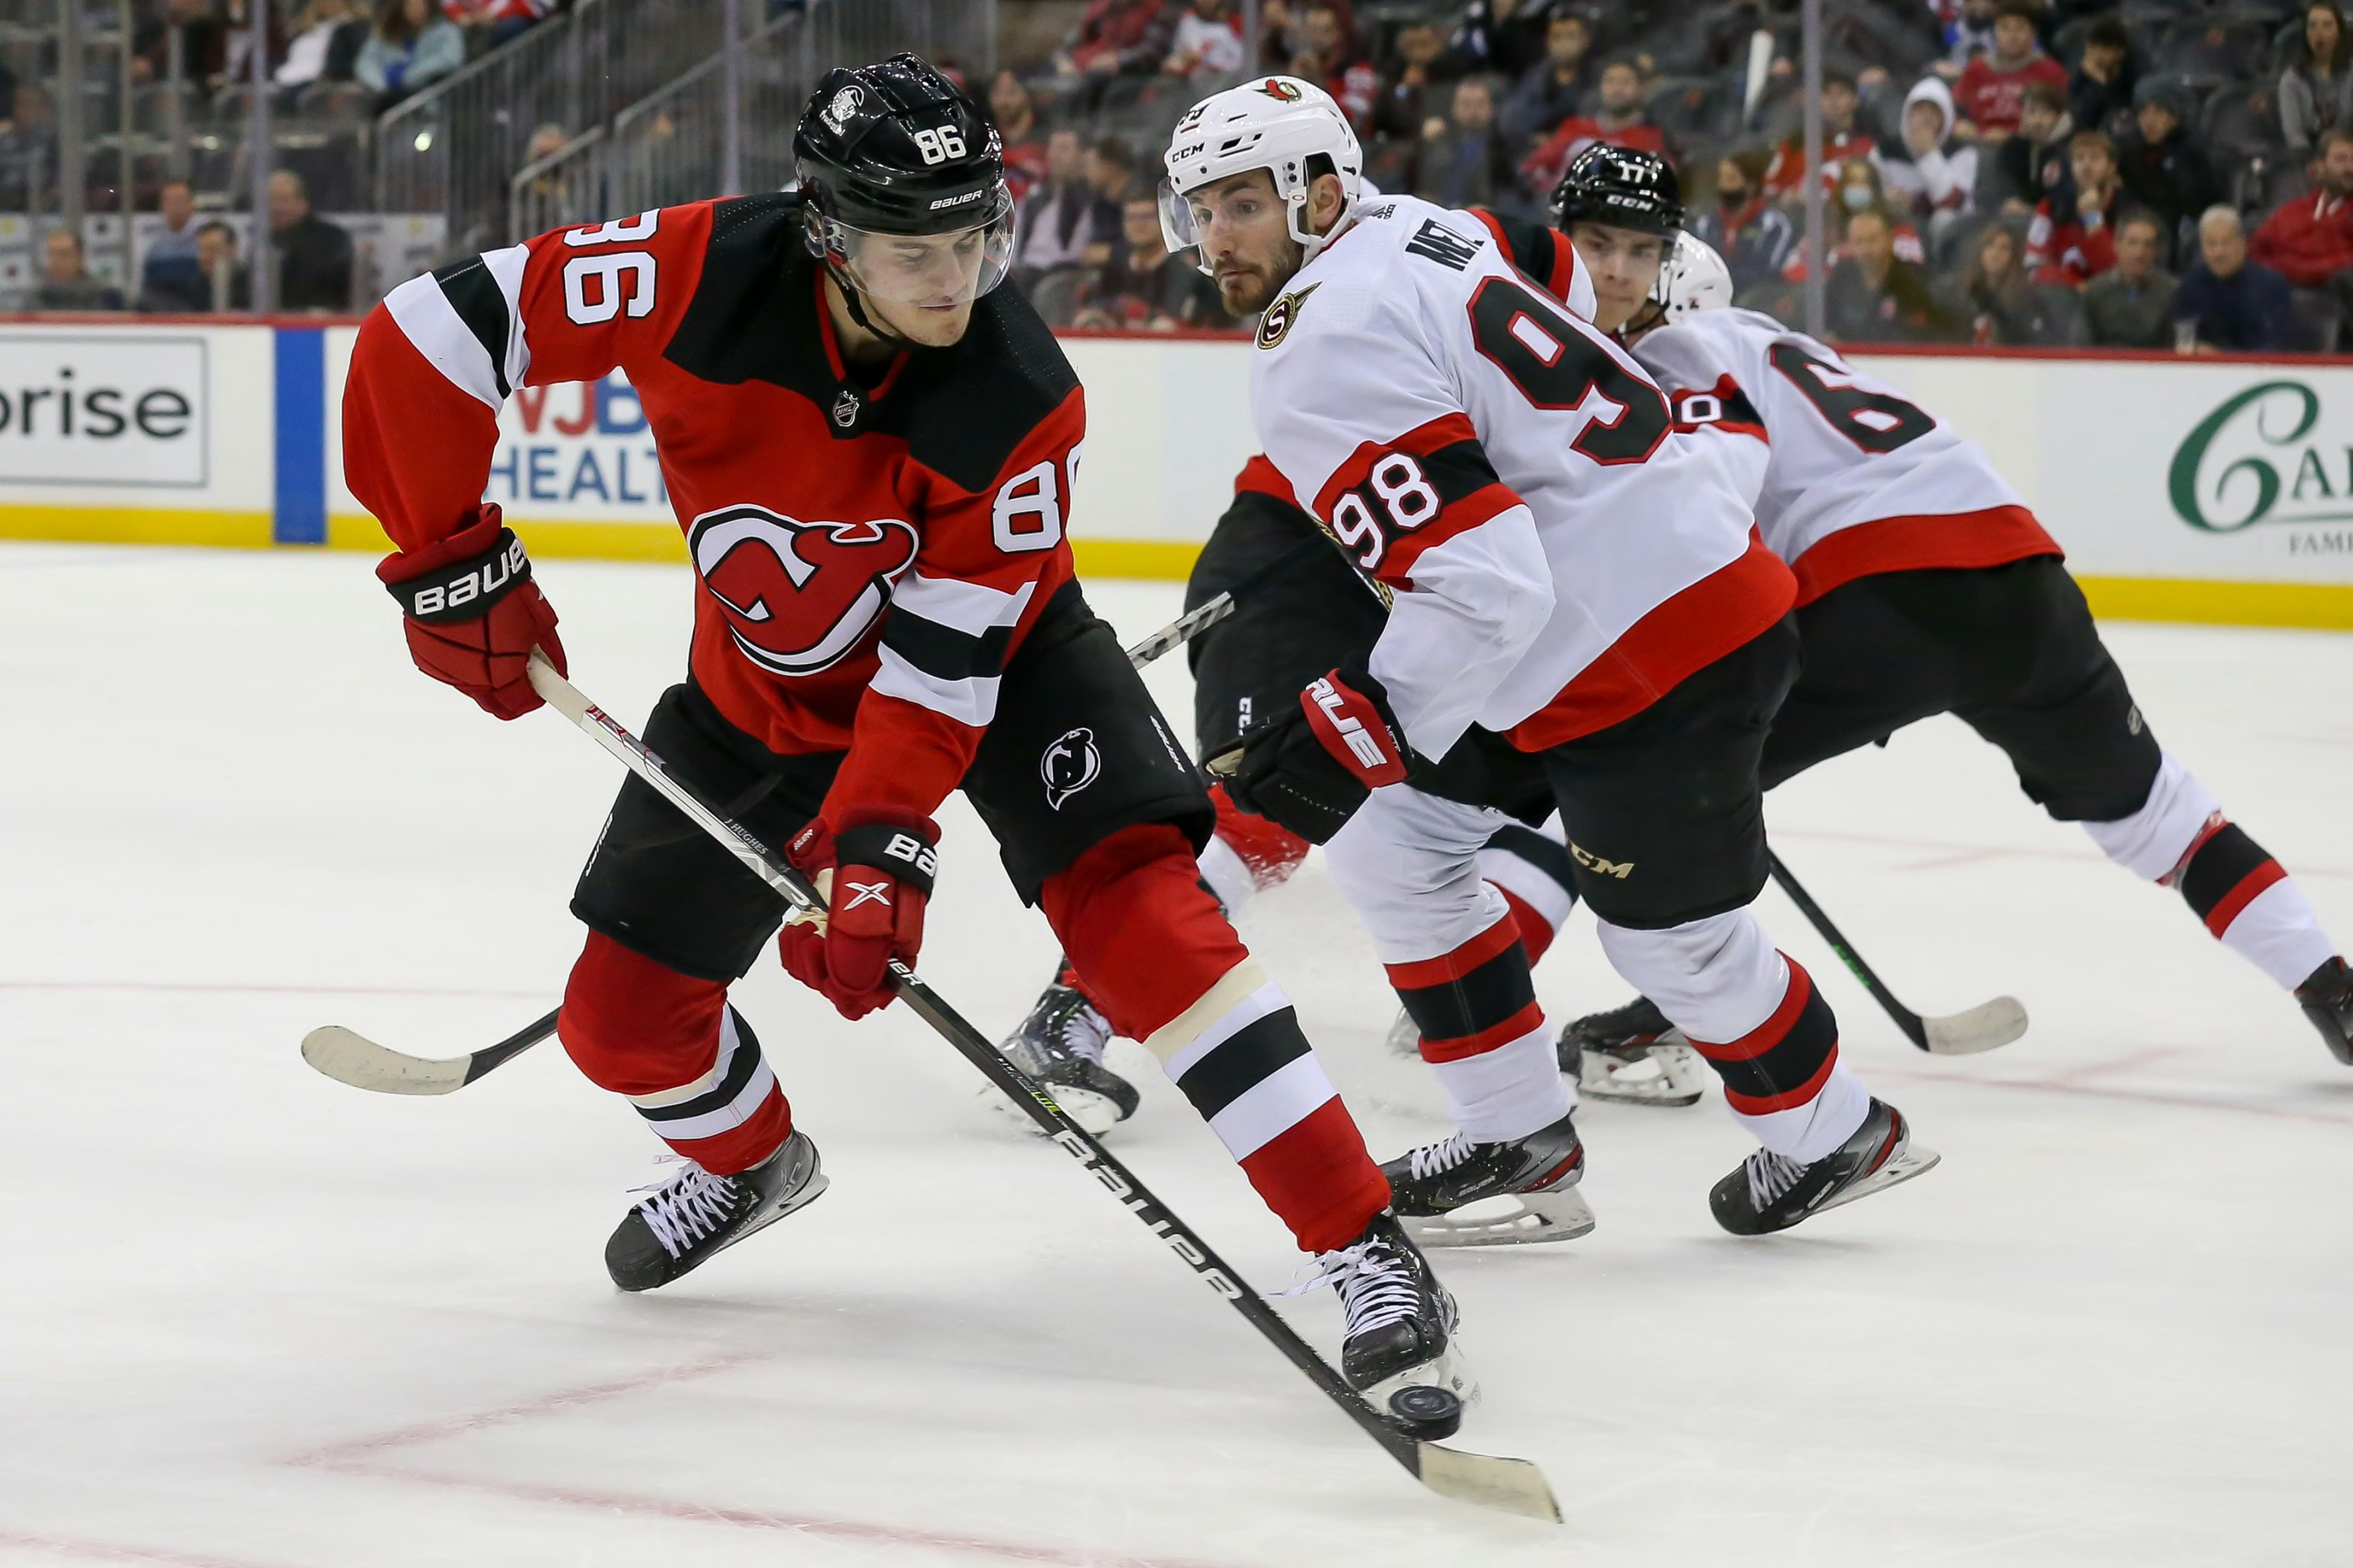 Ottawa Senators vs. New Jersey Devils: Live Stream, TV Channel, Start Time   11/19/2022 - How to Watch and Stream Major League & College Sports -  Sports Illustrated.